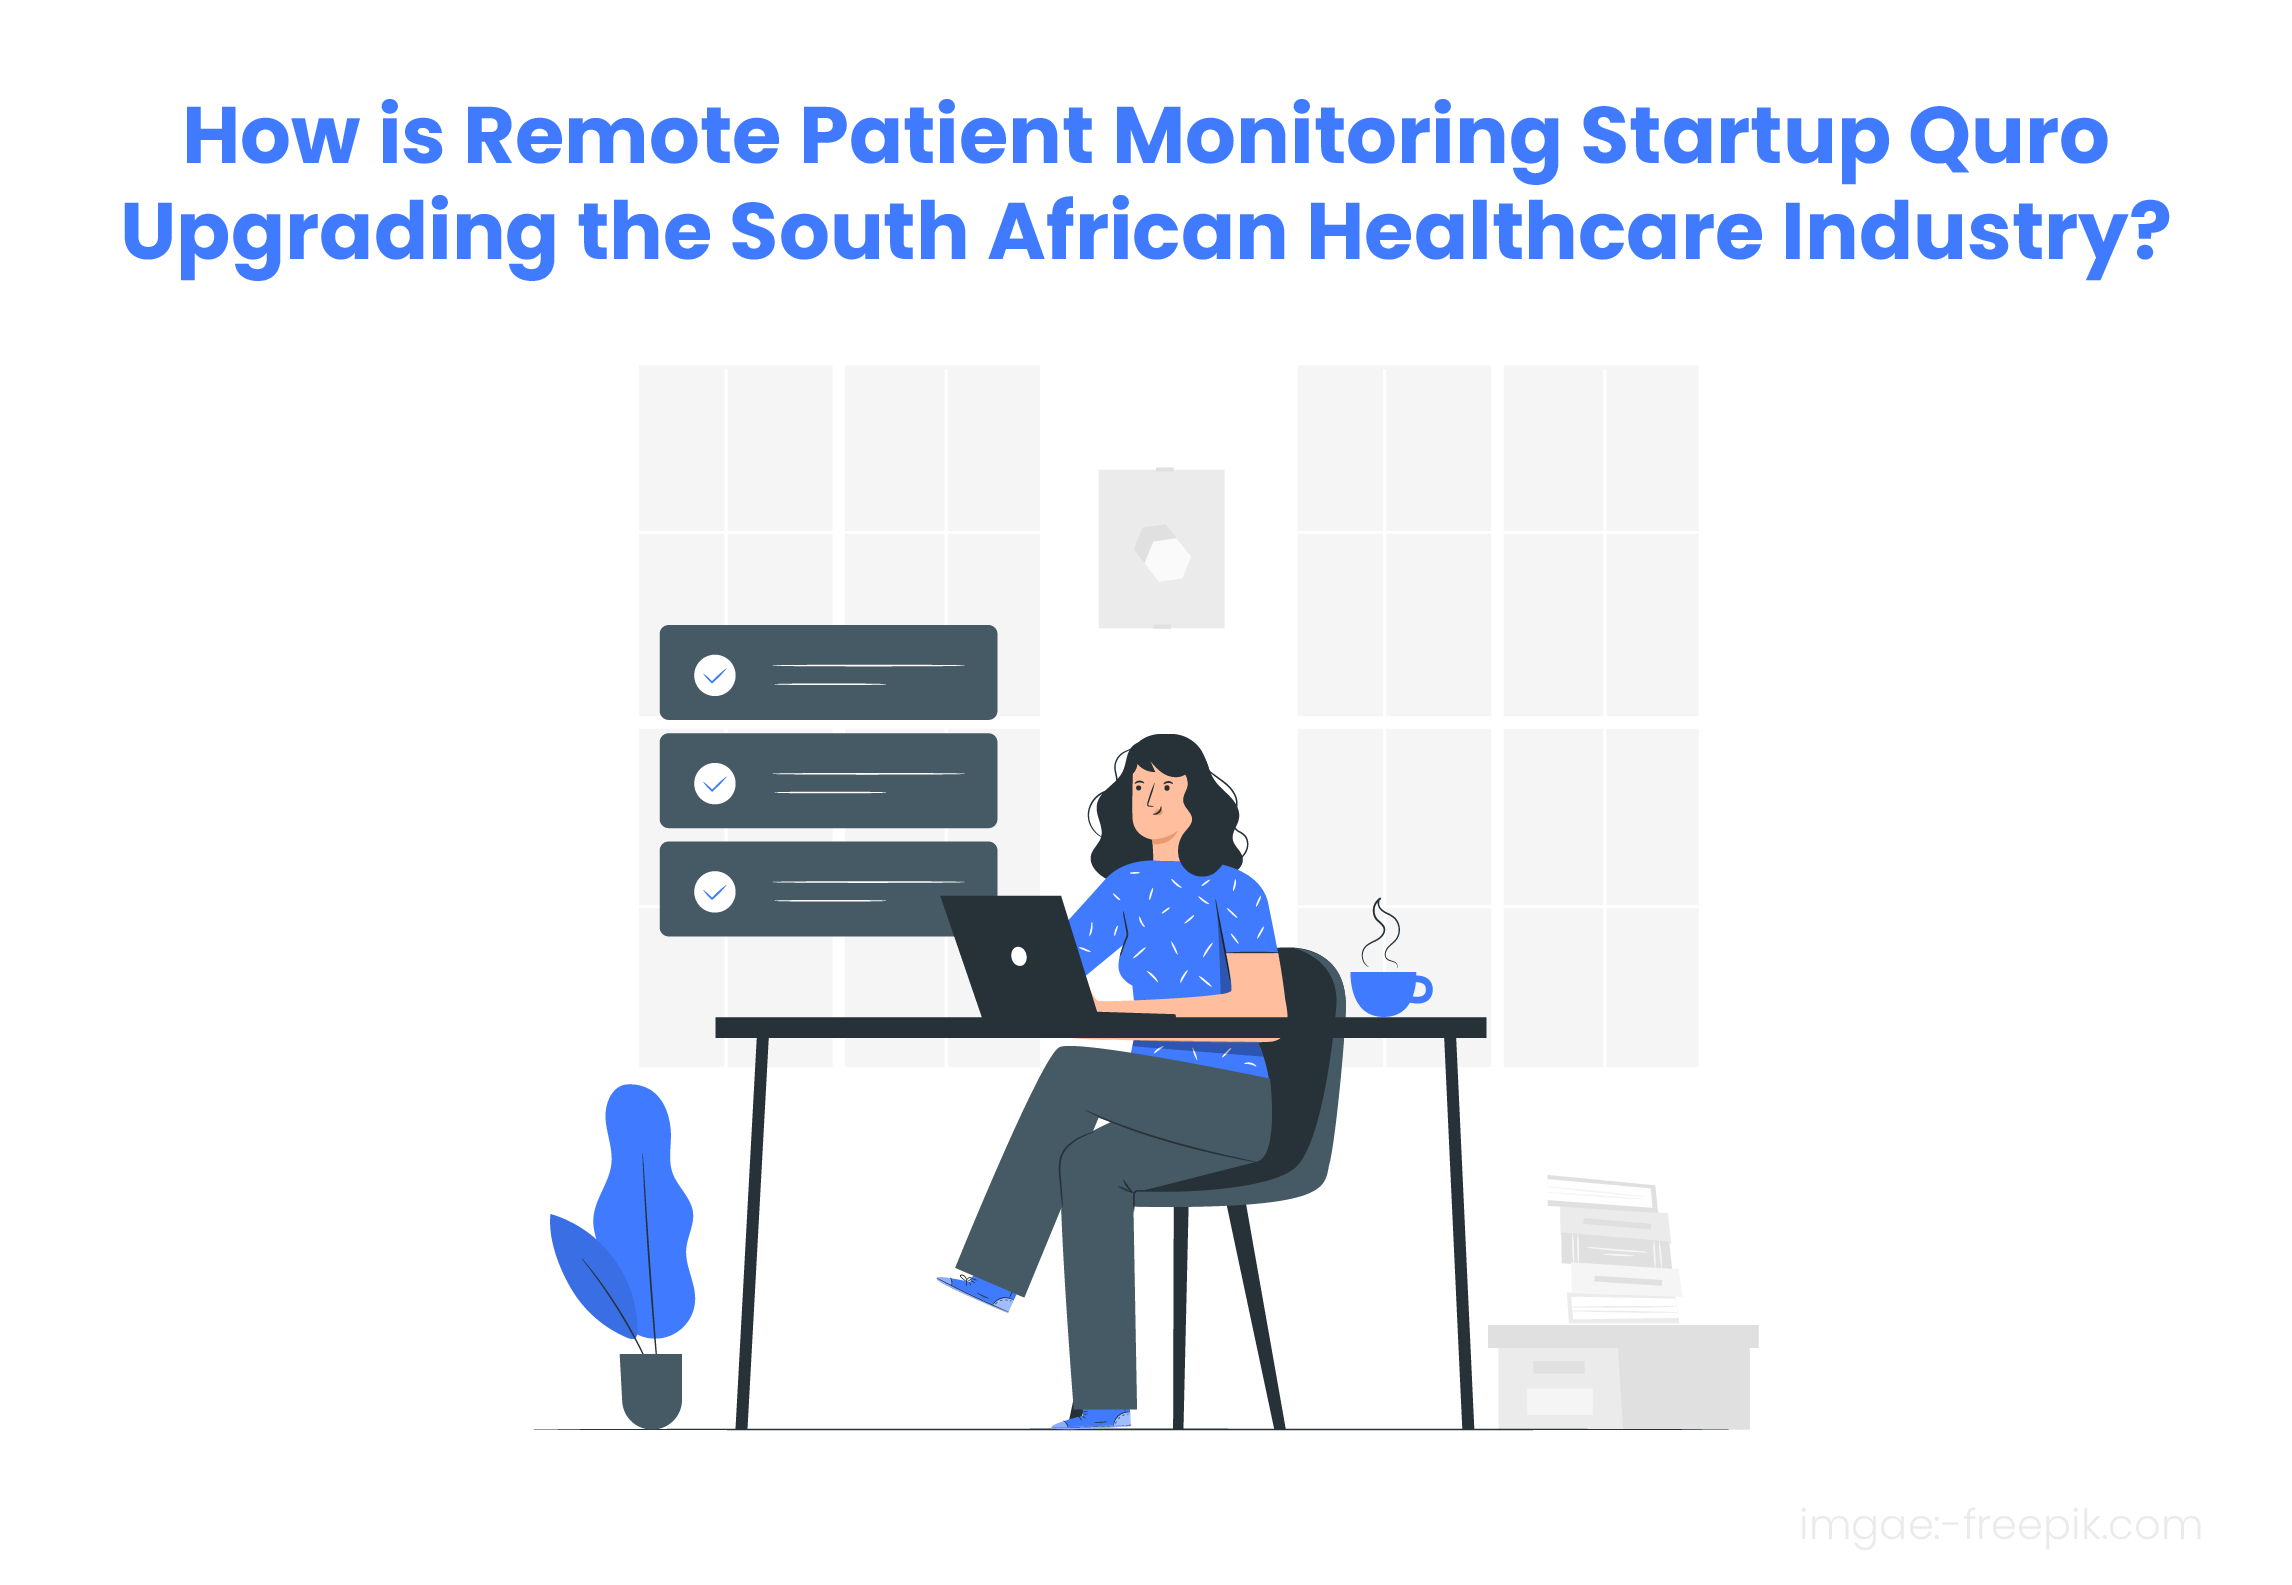 How the South African Healthcare upgraded by an RPM Startup Quro?